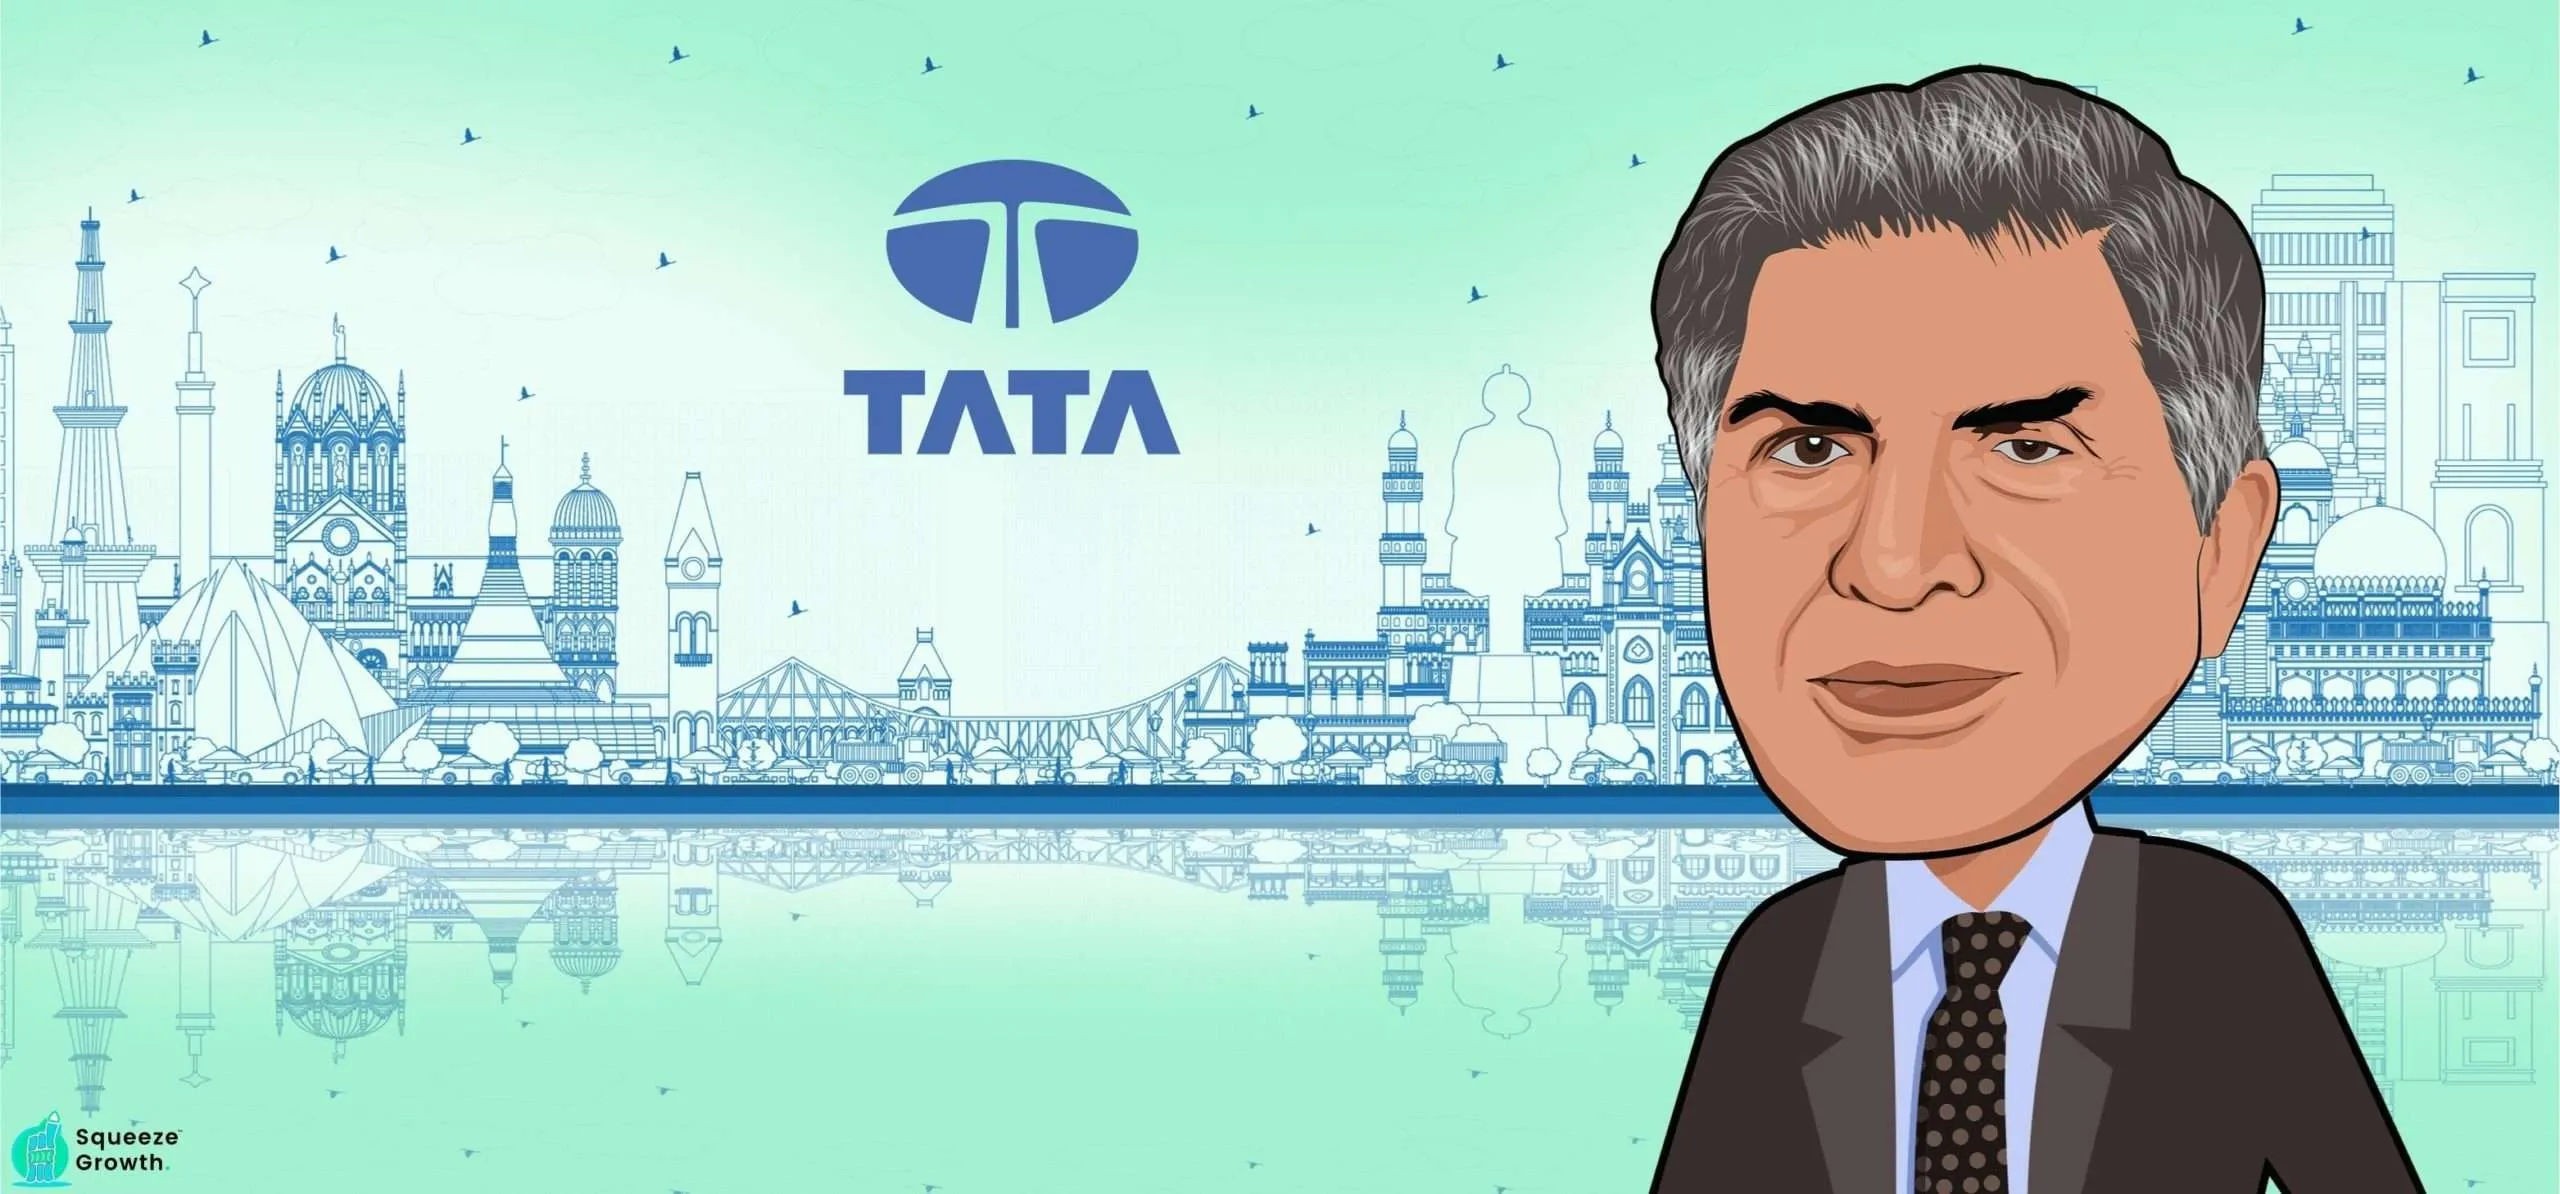 lessons to learn from shri ratan tata